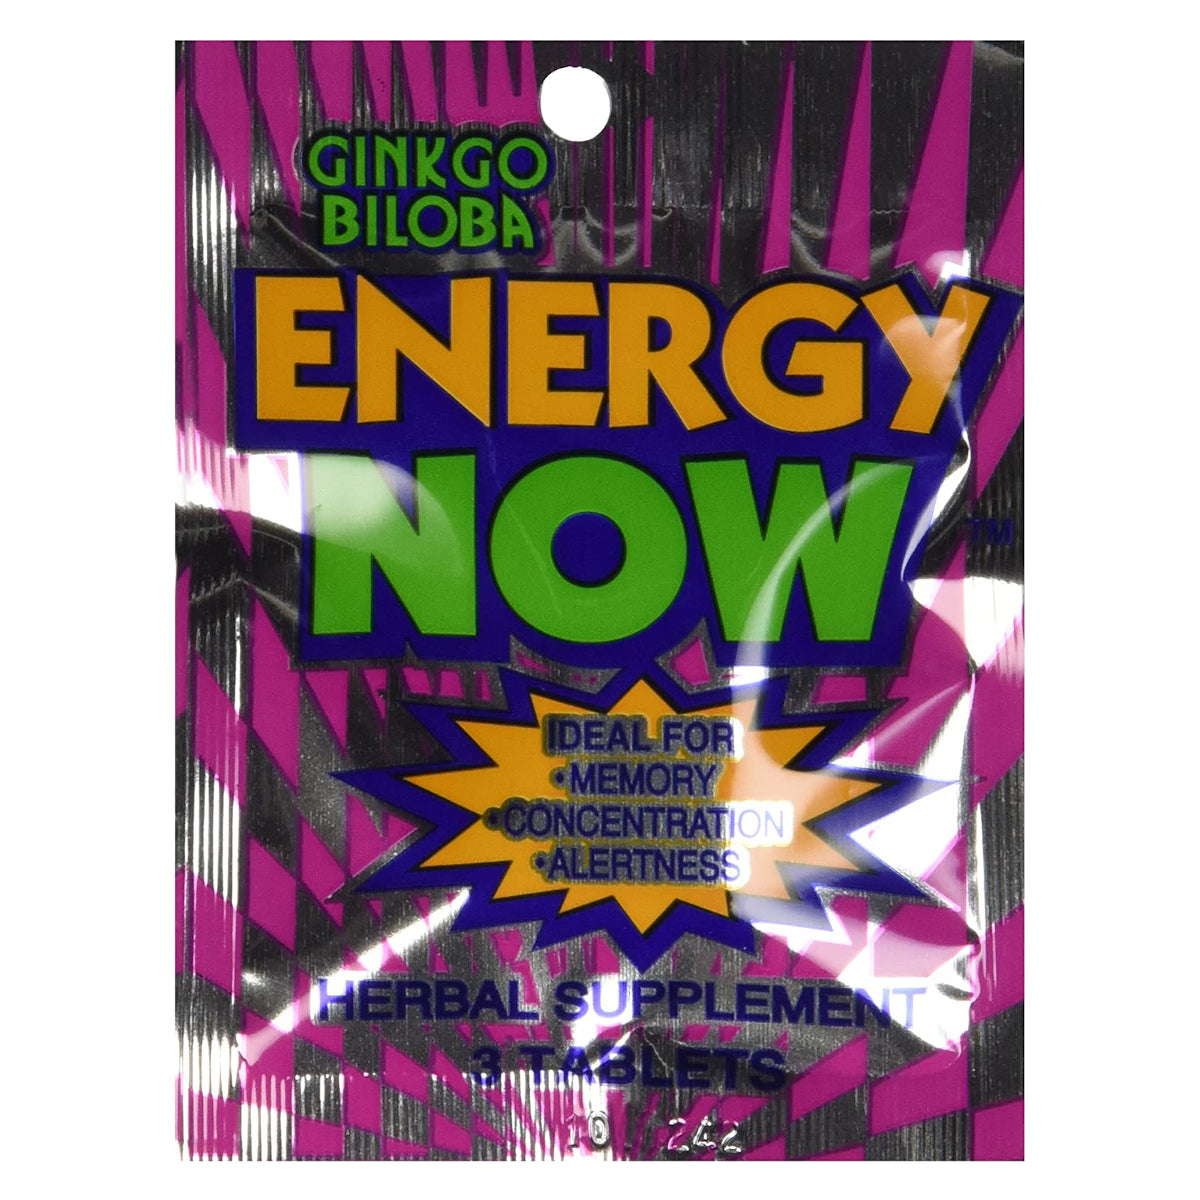 Ginkgo Biloba Energy Now (3 Pills) Ideal for Memory, Concentration, Alertness